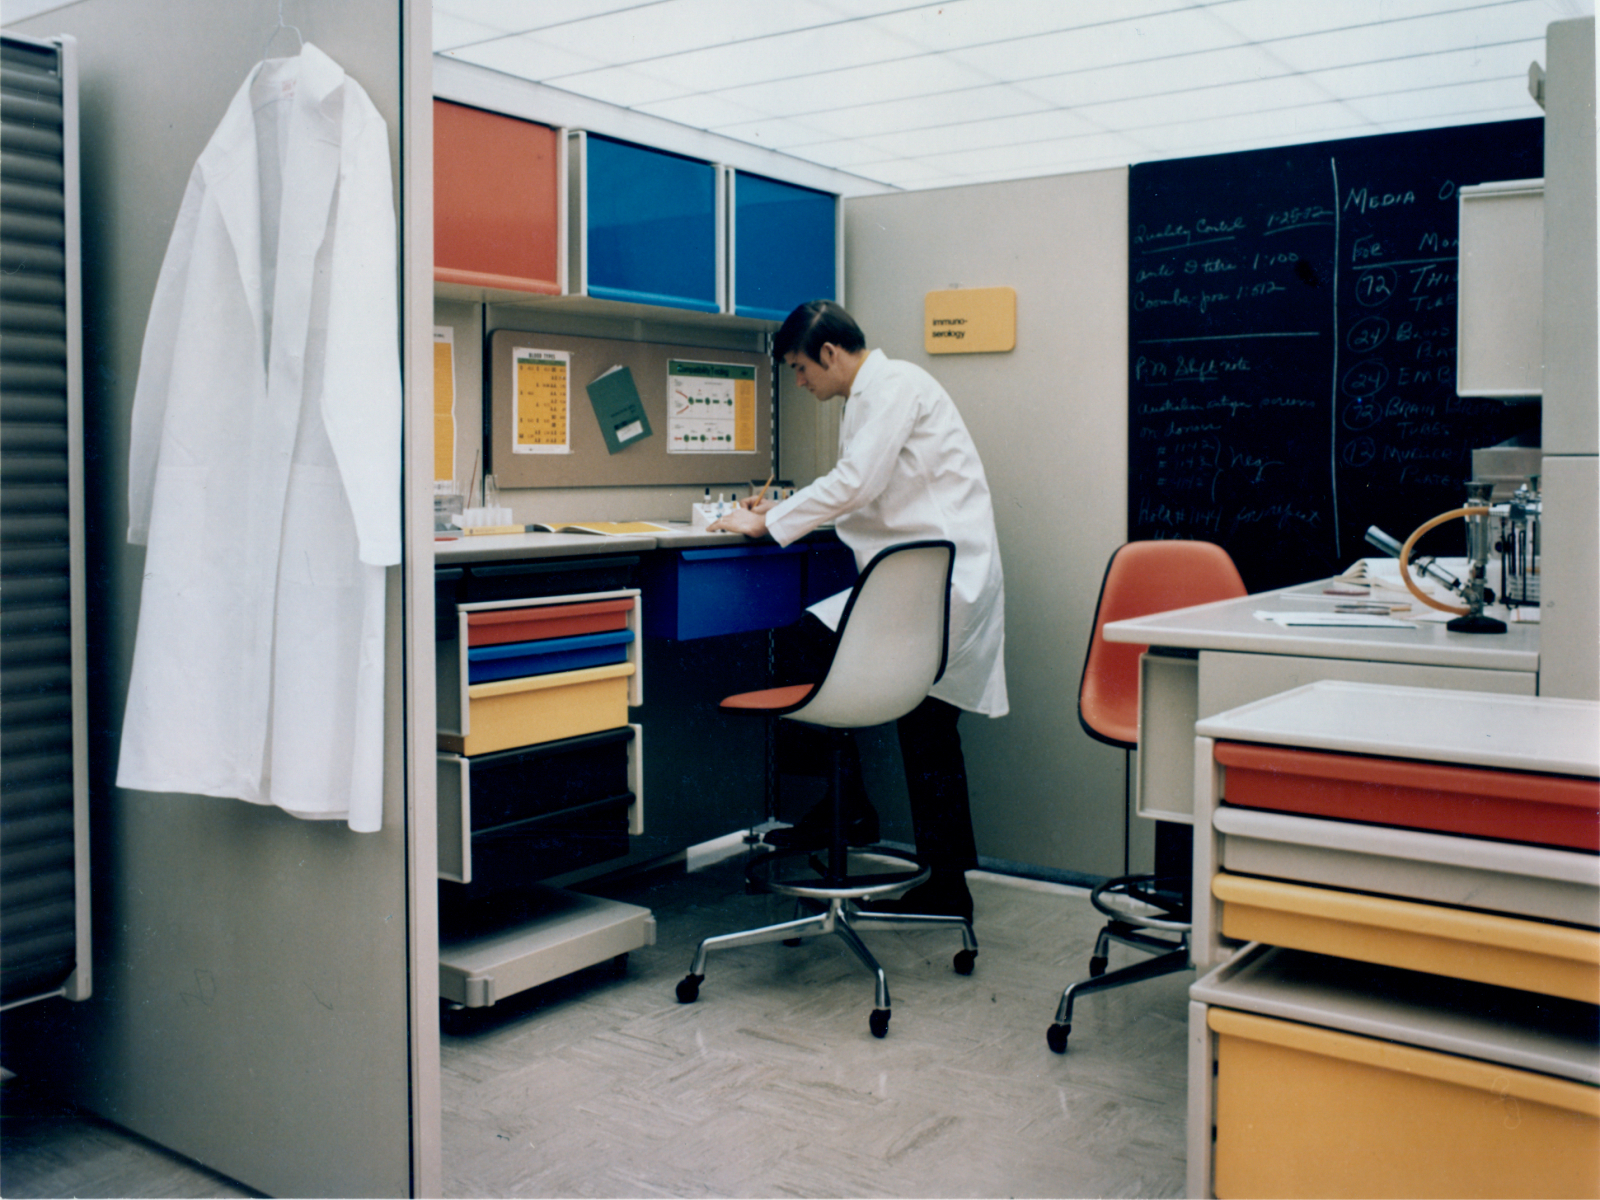 Lab room with a clinician in white coat, white coat hanging, Co/Struc system with overhead lateral storage, wall- and cart-mounted storage, and drawers in red, blue, and yellow. Two red stools with white back and black frame.